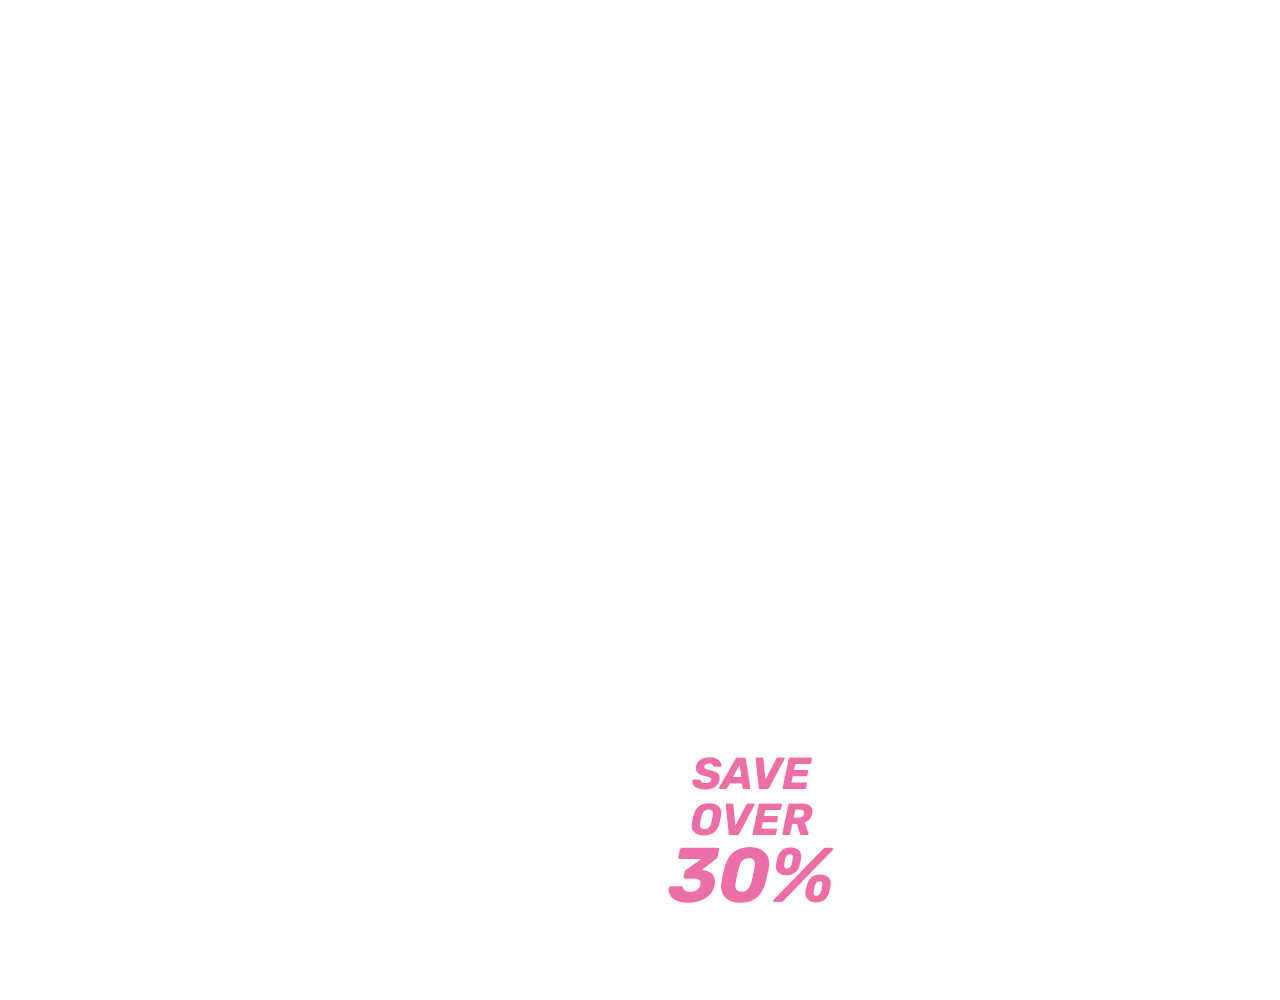 $40 Bags $20 Lunchboxes